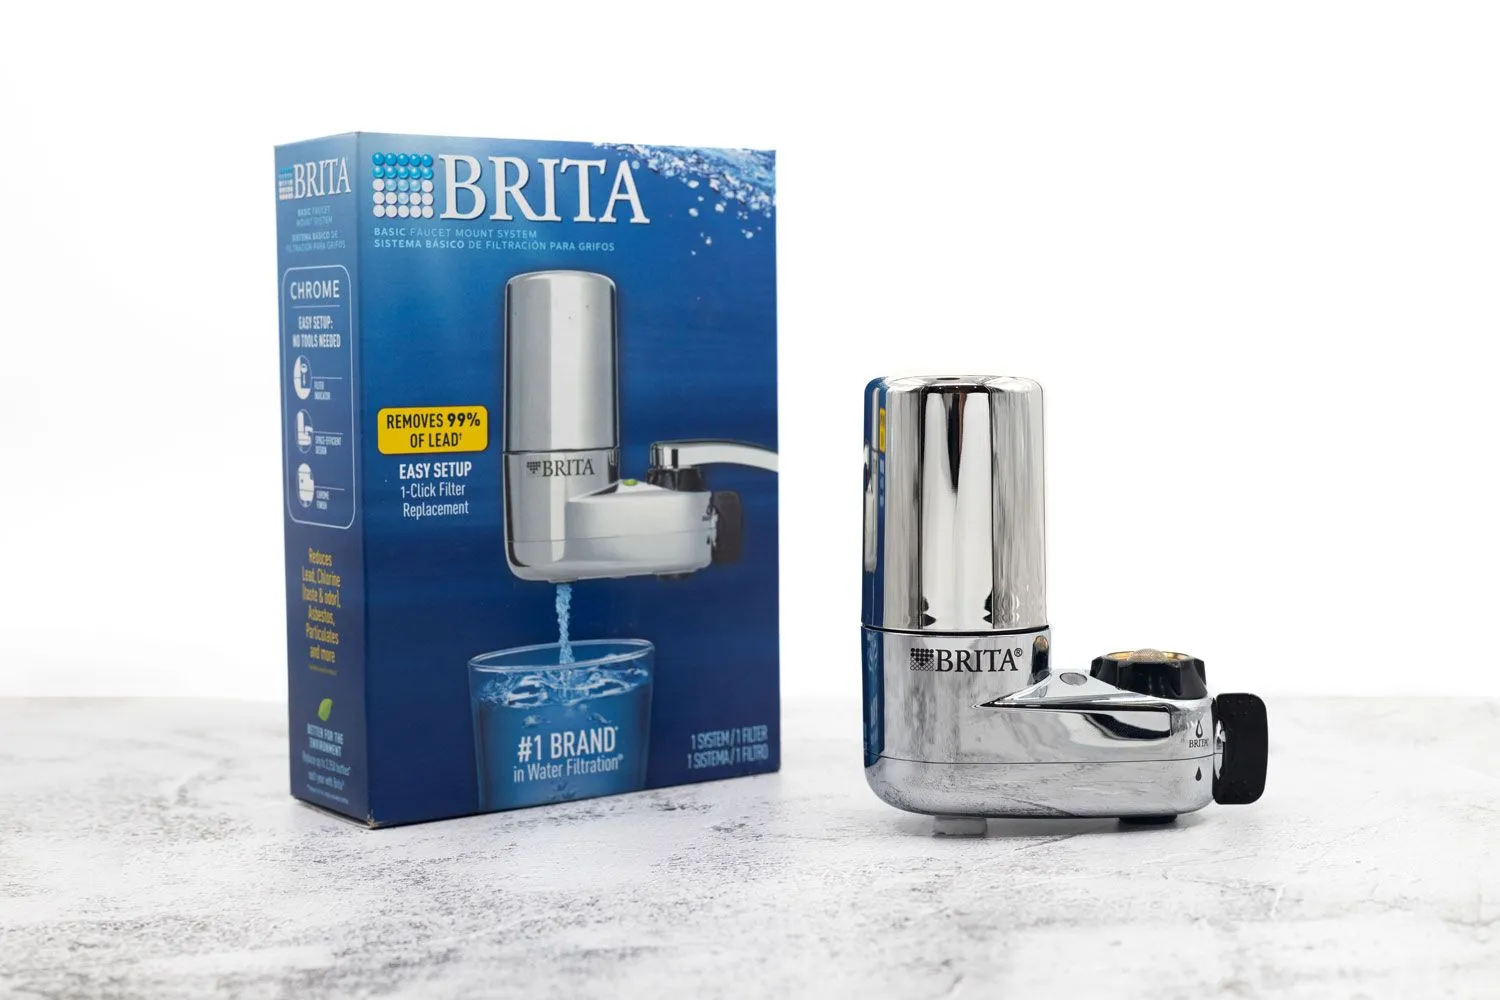  Brita Water Filter for Sink Complete Faucet Mount Water  Filtration System + Brita Standard Water Filter Replacements: Tools & Home  Improvement